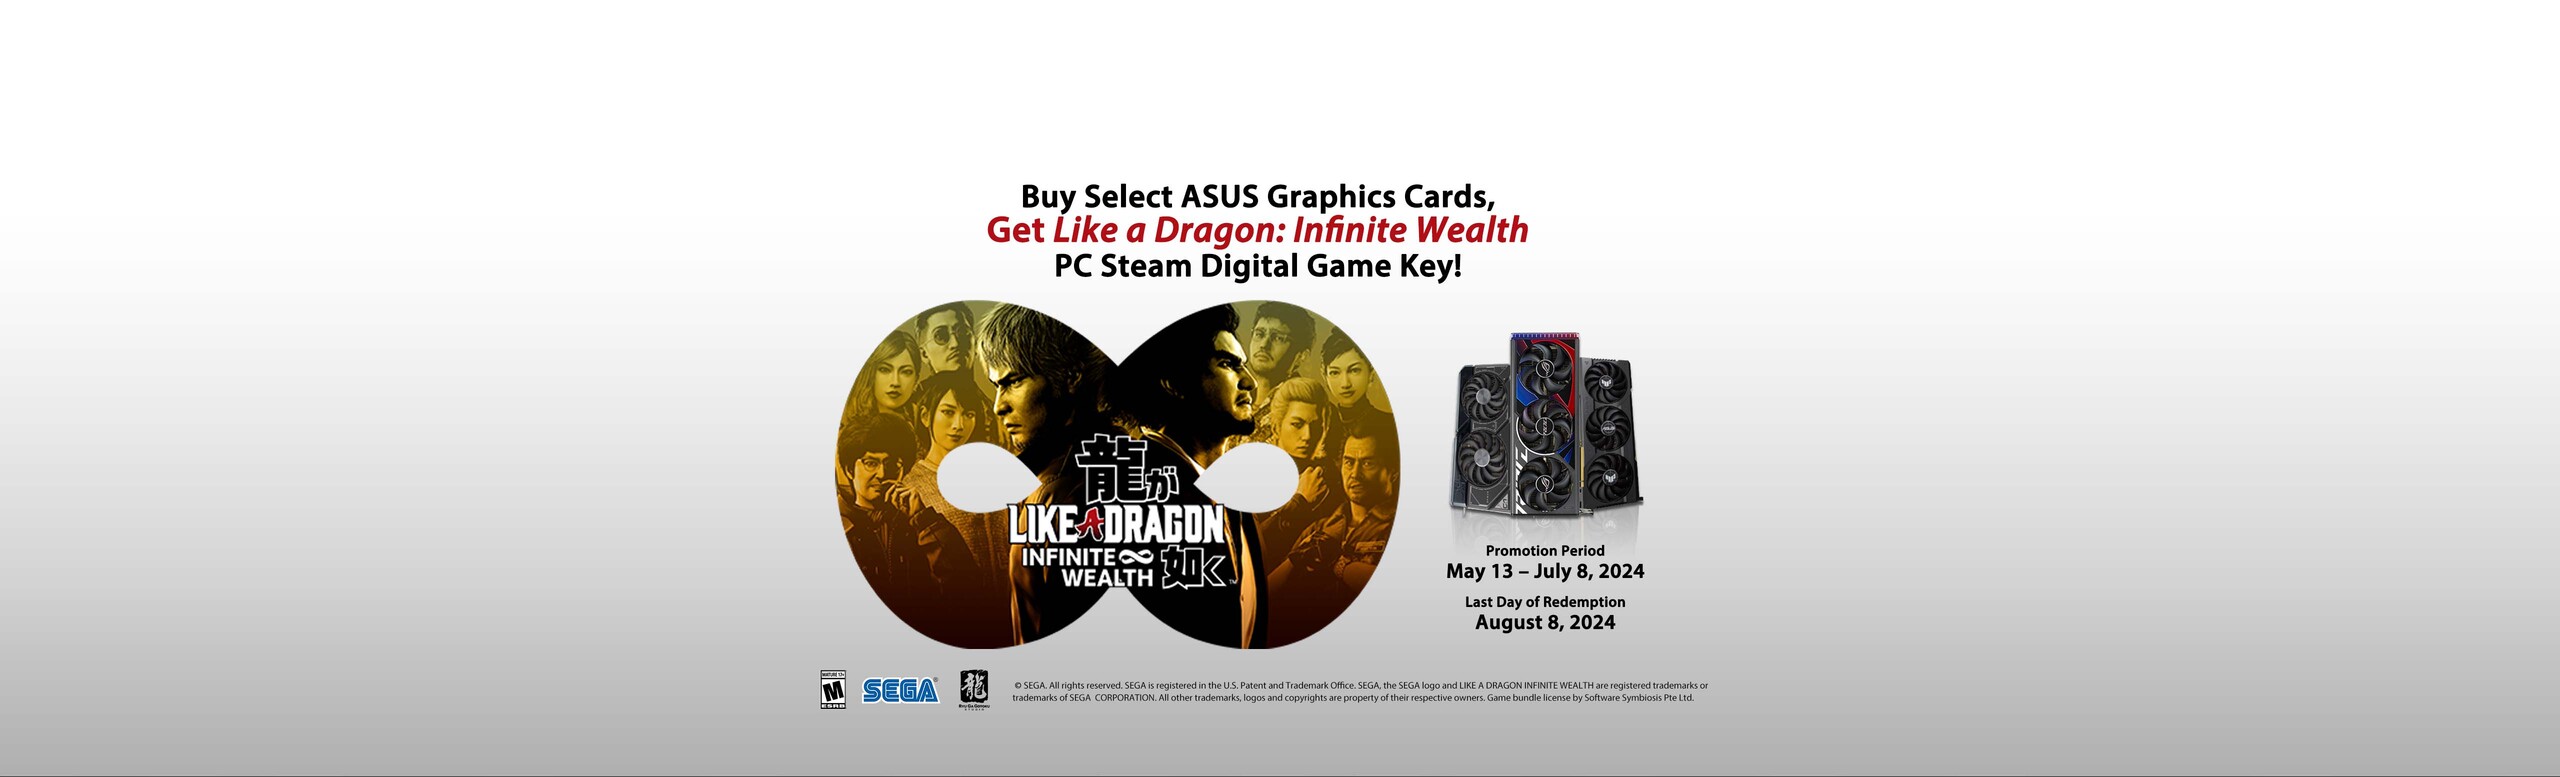 Like a Dragon: Infinite Wealth key visual and ASUS graphics card line-up